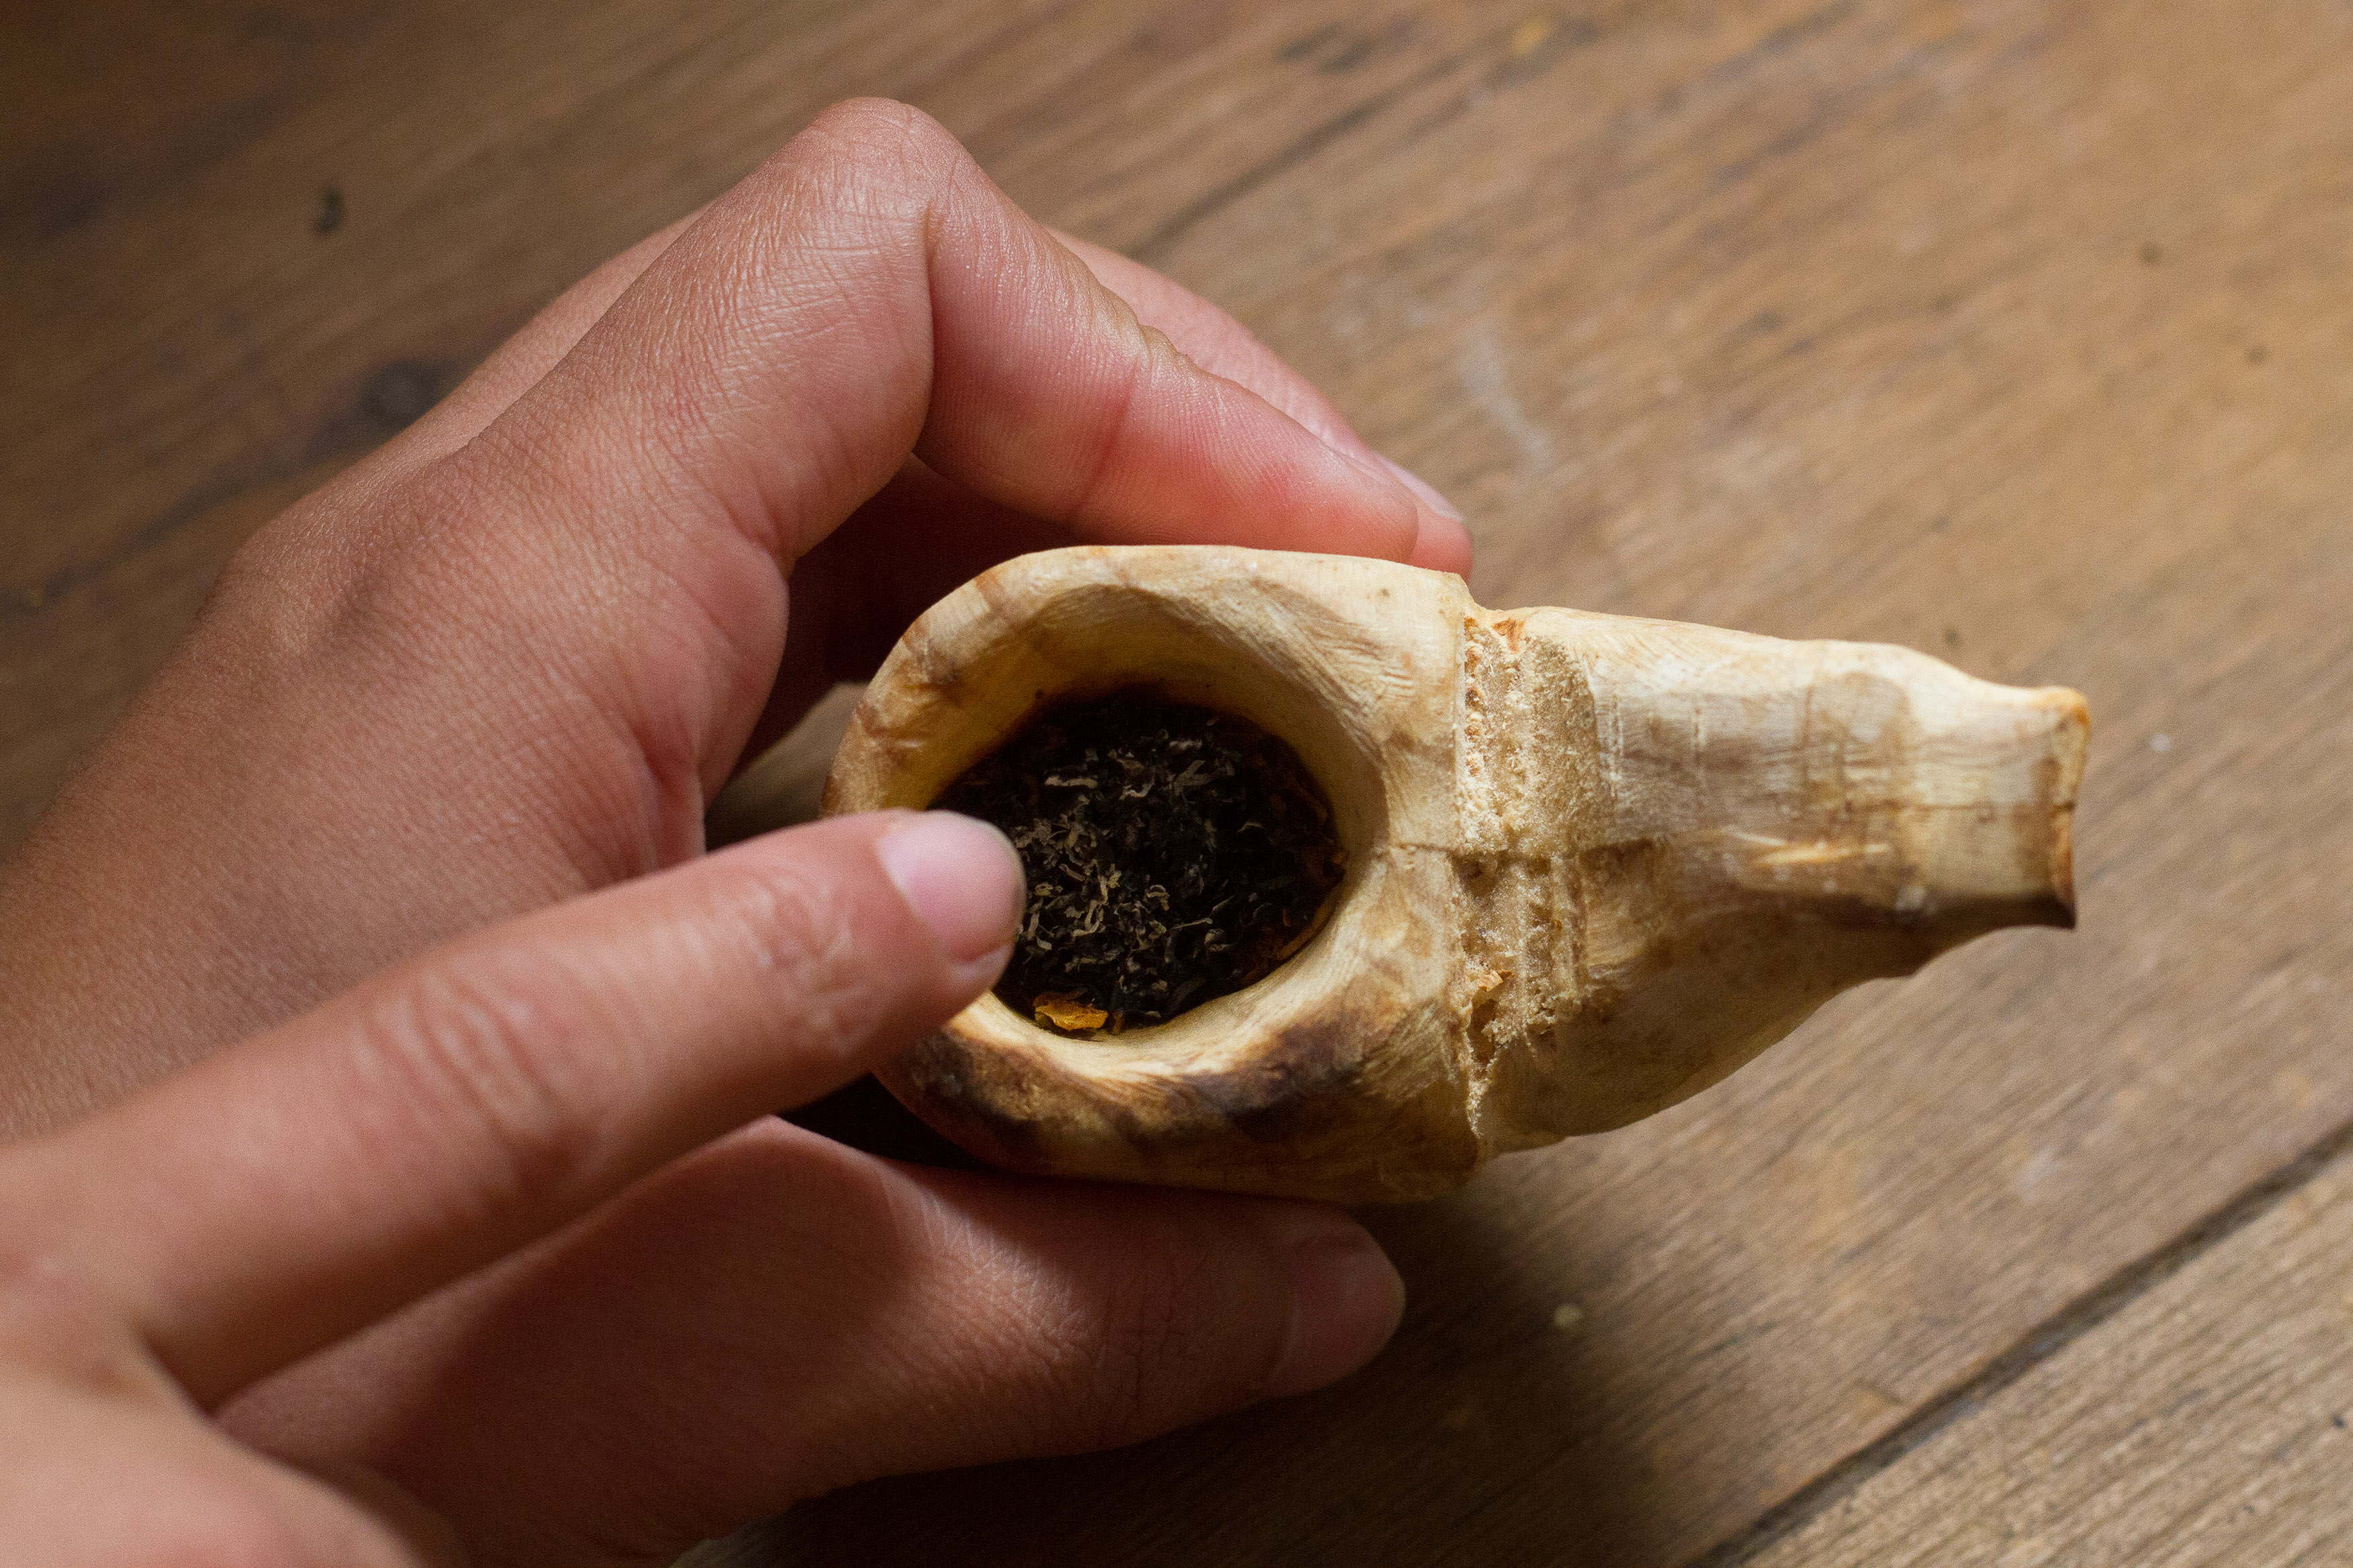 How to Smoke a Pipe Instead of Cigarettes: 8 Steps (with Pictures)